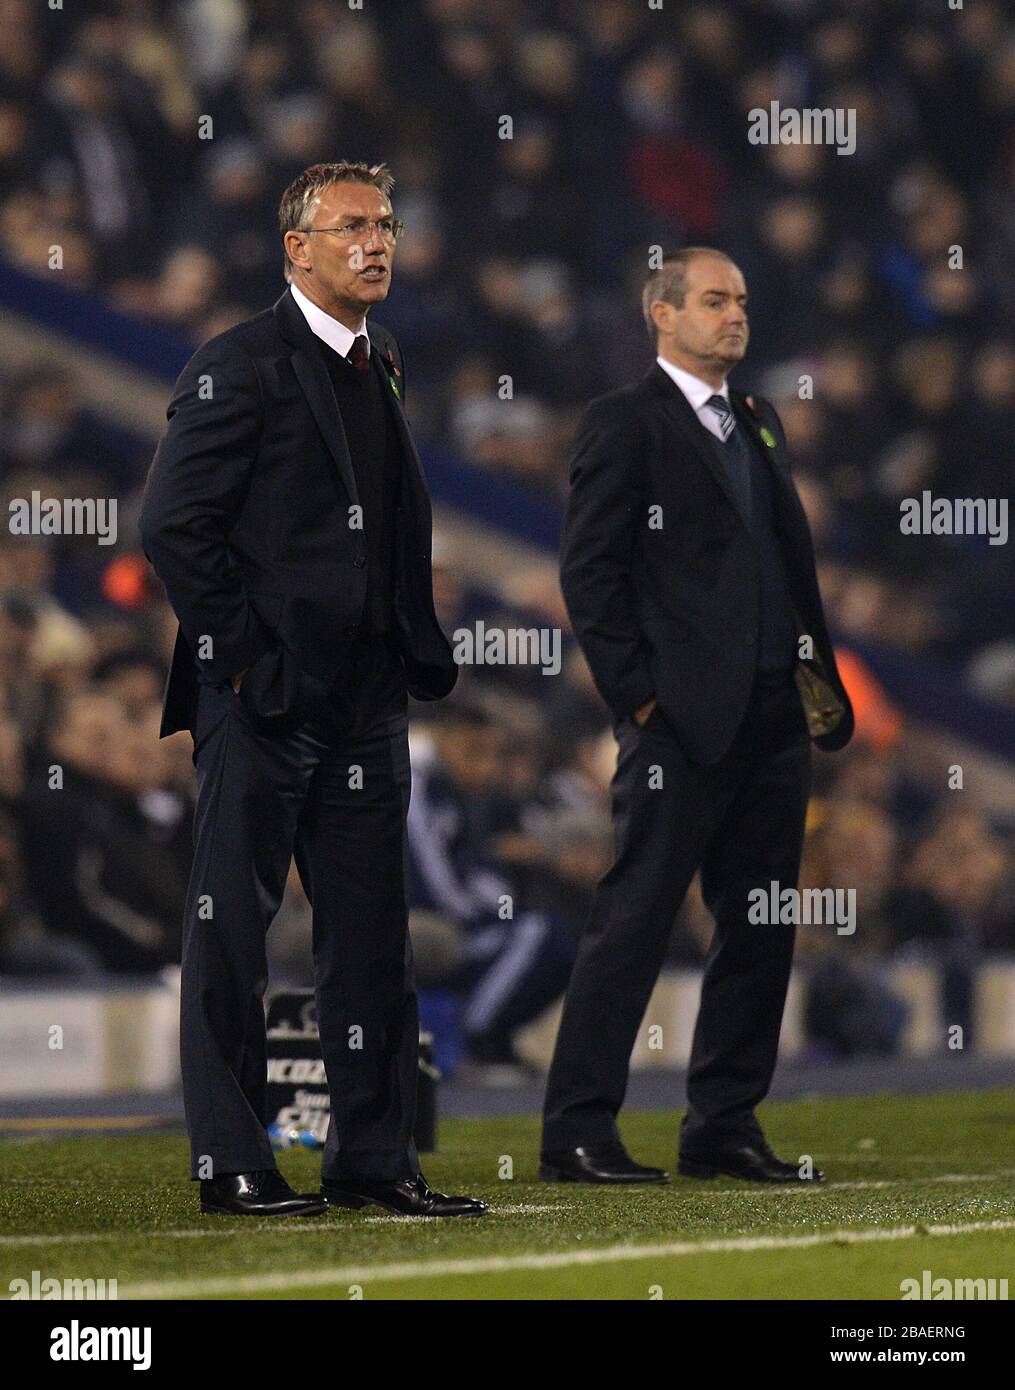 Southampton's manager Nigel Adkins (left) and West Bromwich Albion's manager Steve Clarke on the touchline. Stock Photo